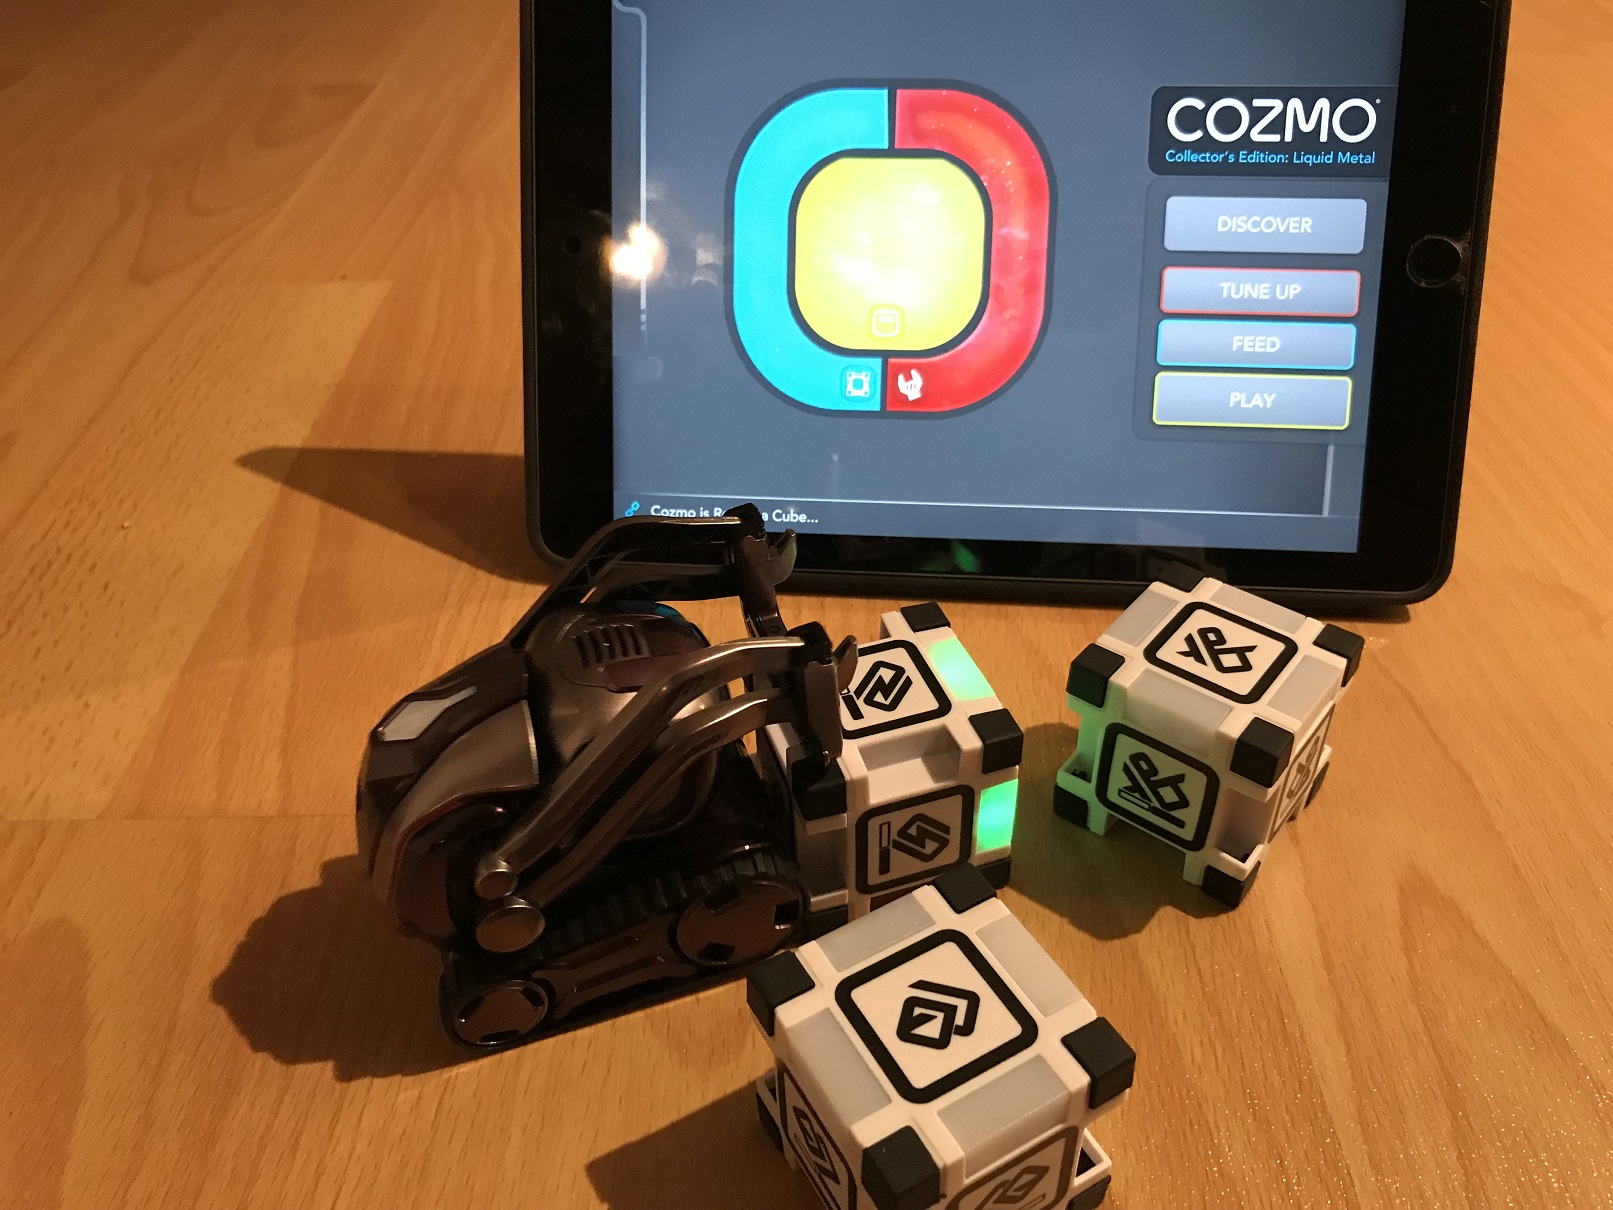 Anki Cozmo Engaging with Cubes